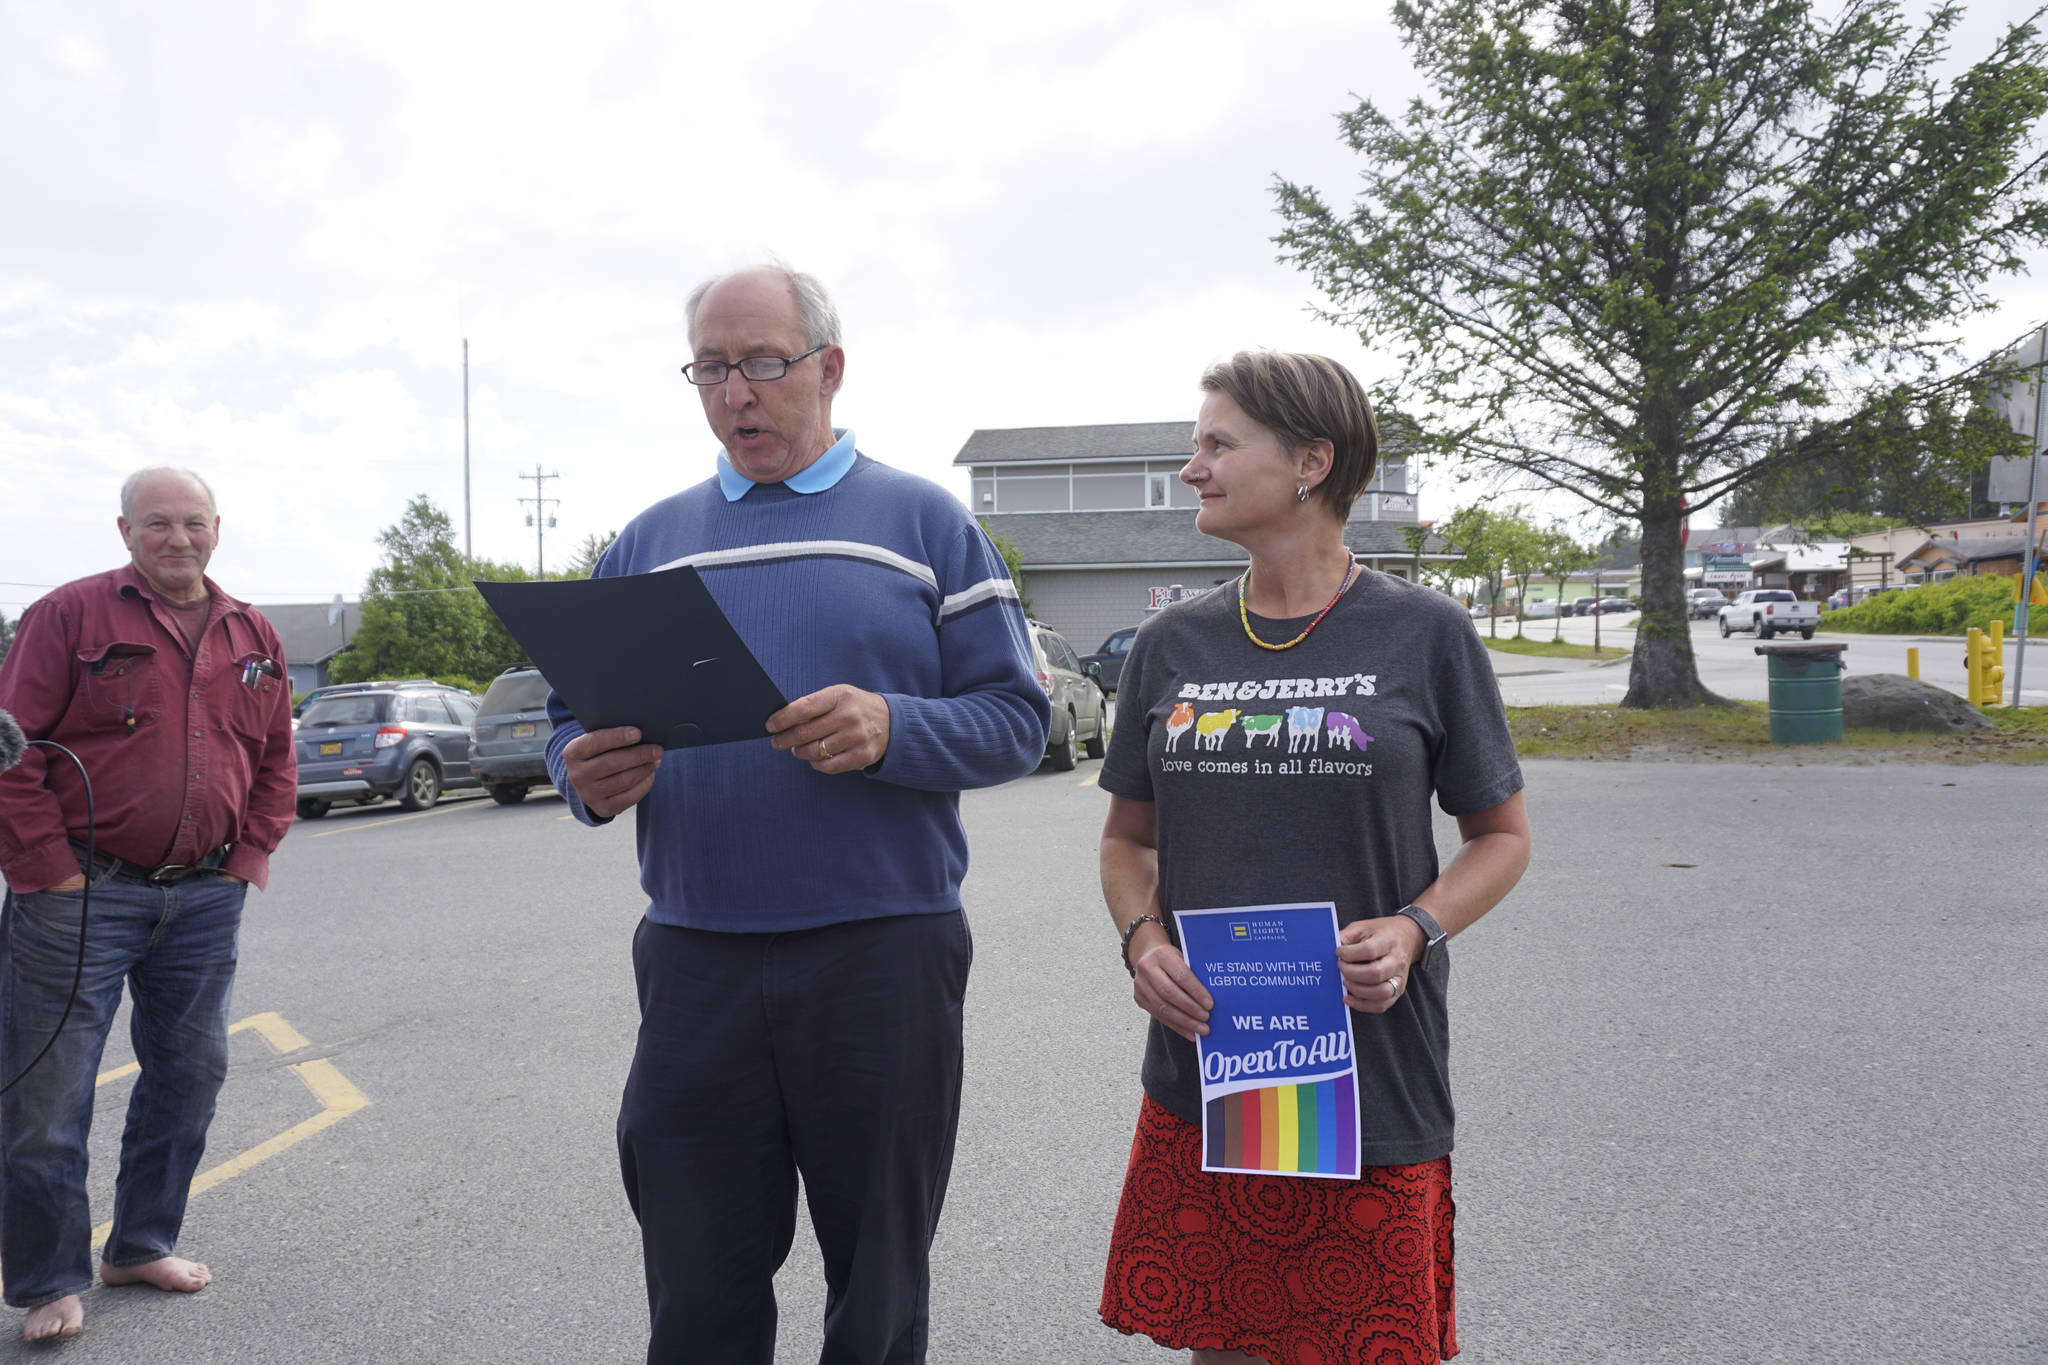 Homer Mayor Bryan Zak reads a Mayoral Recognition recognizing June as Homer Pride Month at about 6 p.m. Monday, June 11, 2018 outside Homer City Hall in Homer, Alaska. A crowd of about 75 people attended in support of Pride Month. Council members Shelly Erickson, Heath Smith and Thomas Stroozas notified the city clerk that they would not attend the June 11 meeting, forcing its cancellation because of lack of a quorum. Catriona Reynolds, right, listens to Zak. She asked the mayor for the recognition. (Photo by Michael Armstrong/Homer News)